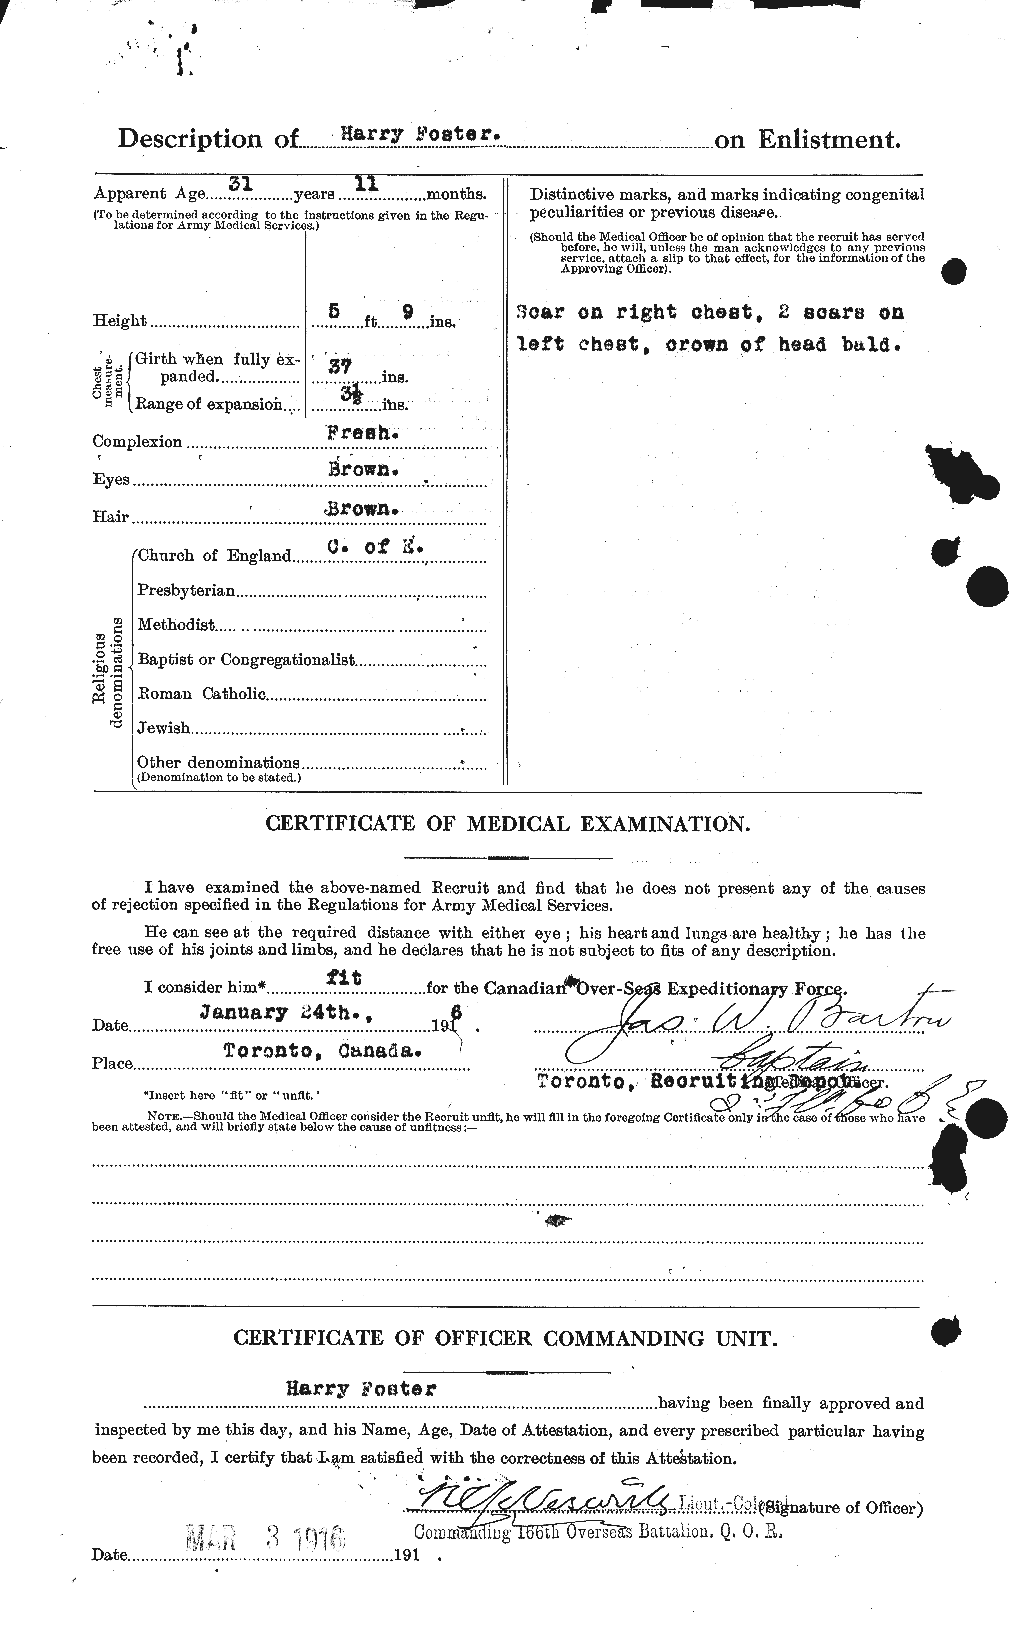 Personnel Records of the First World War - CEF 330743b